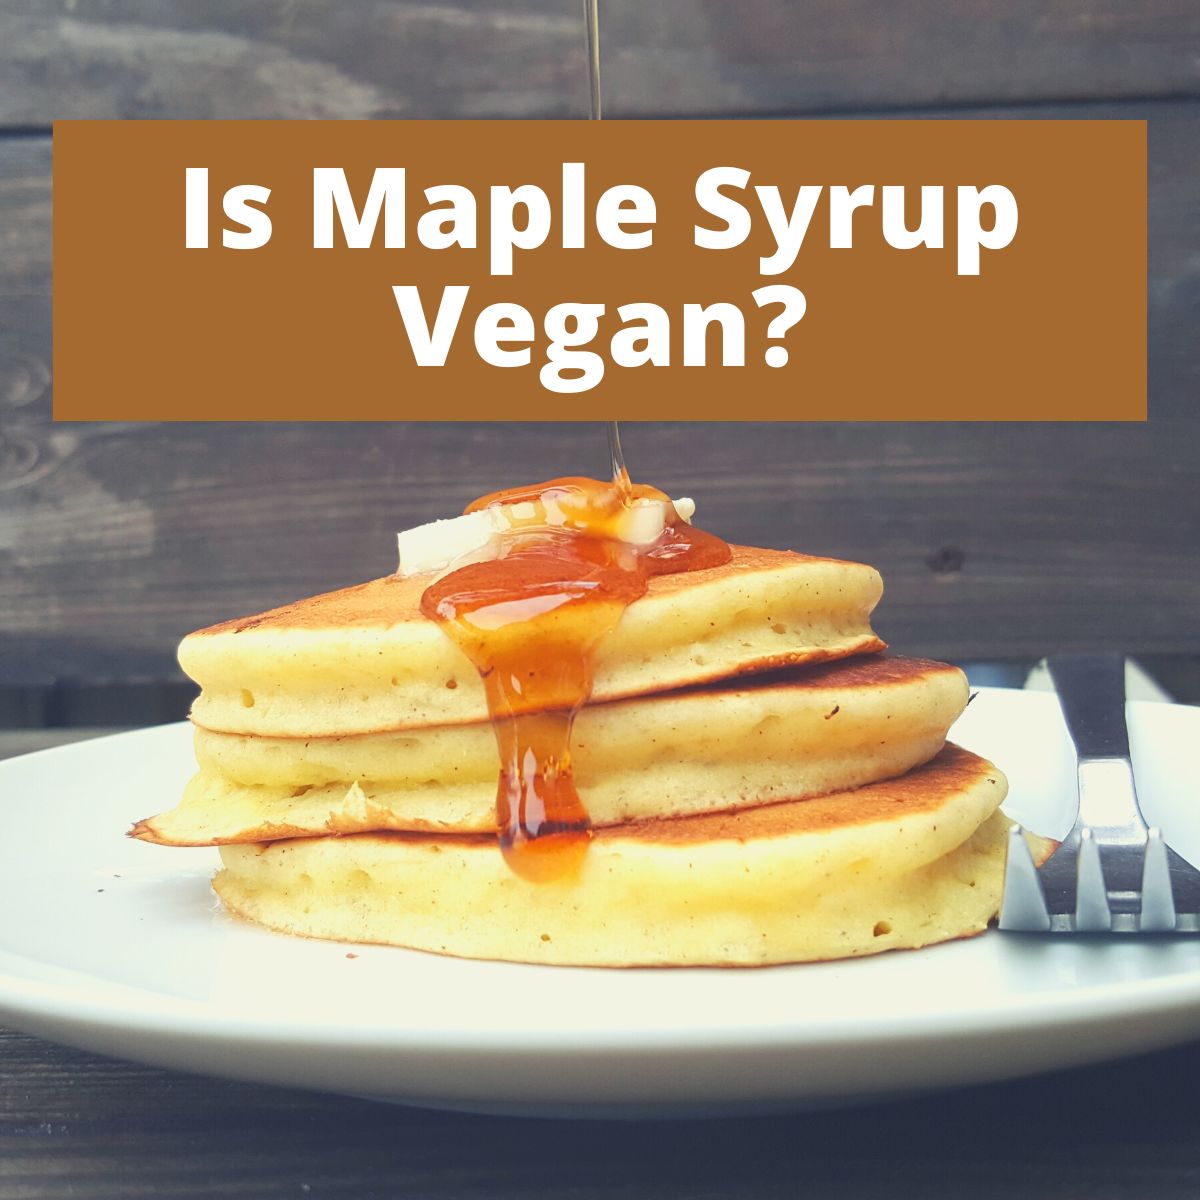 A stack of pancakes with maple syrup on them and text that says Is Maple Syrup Vegan?